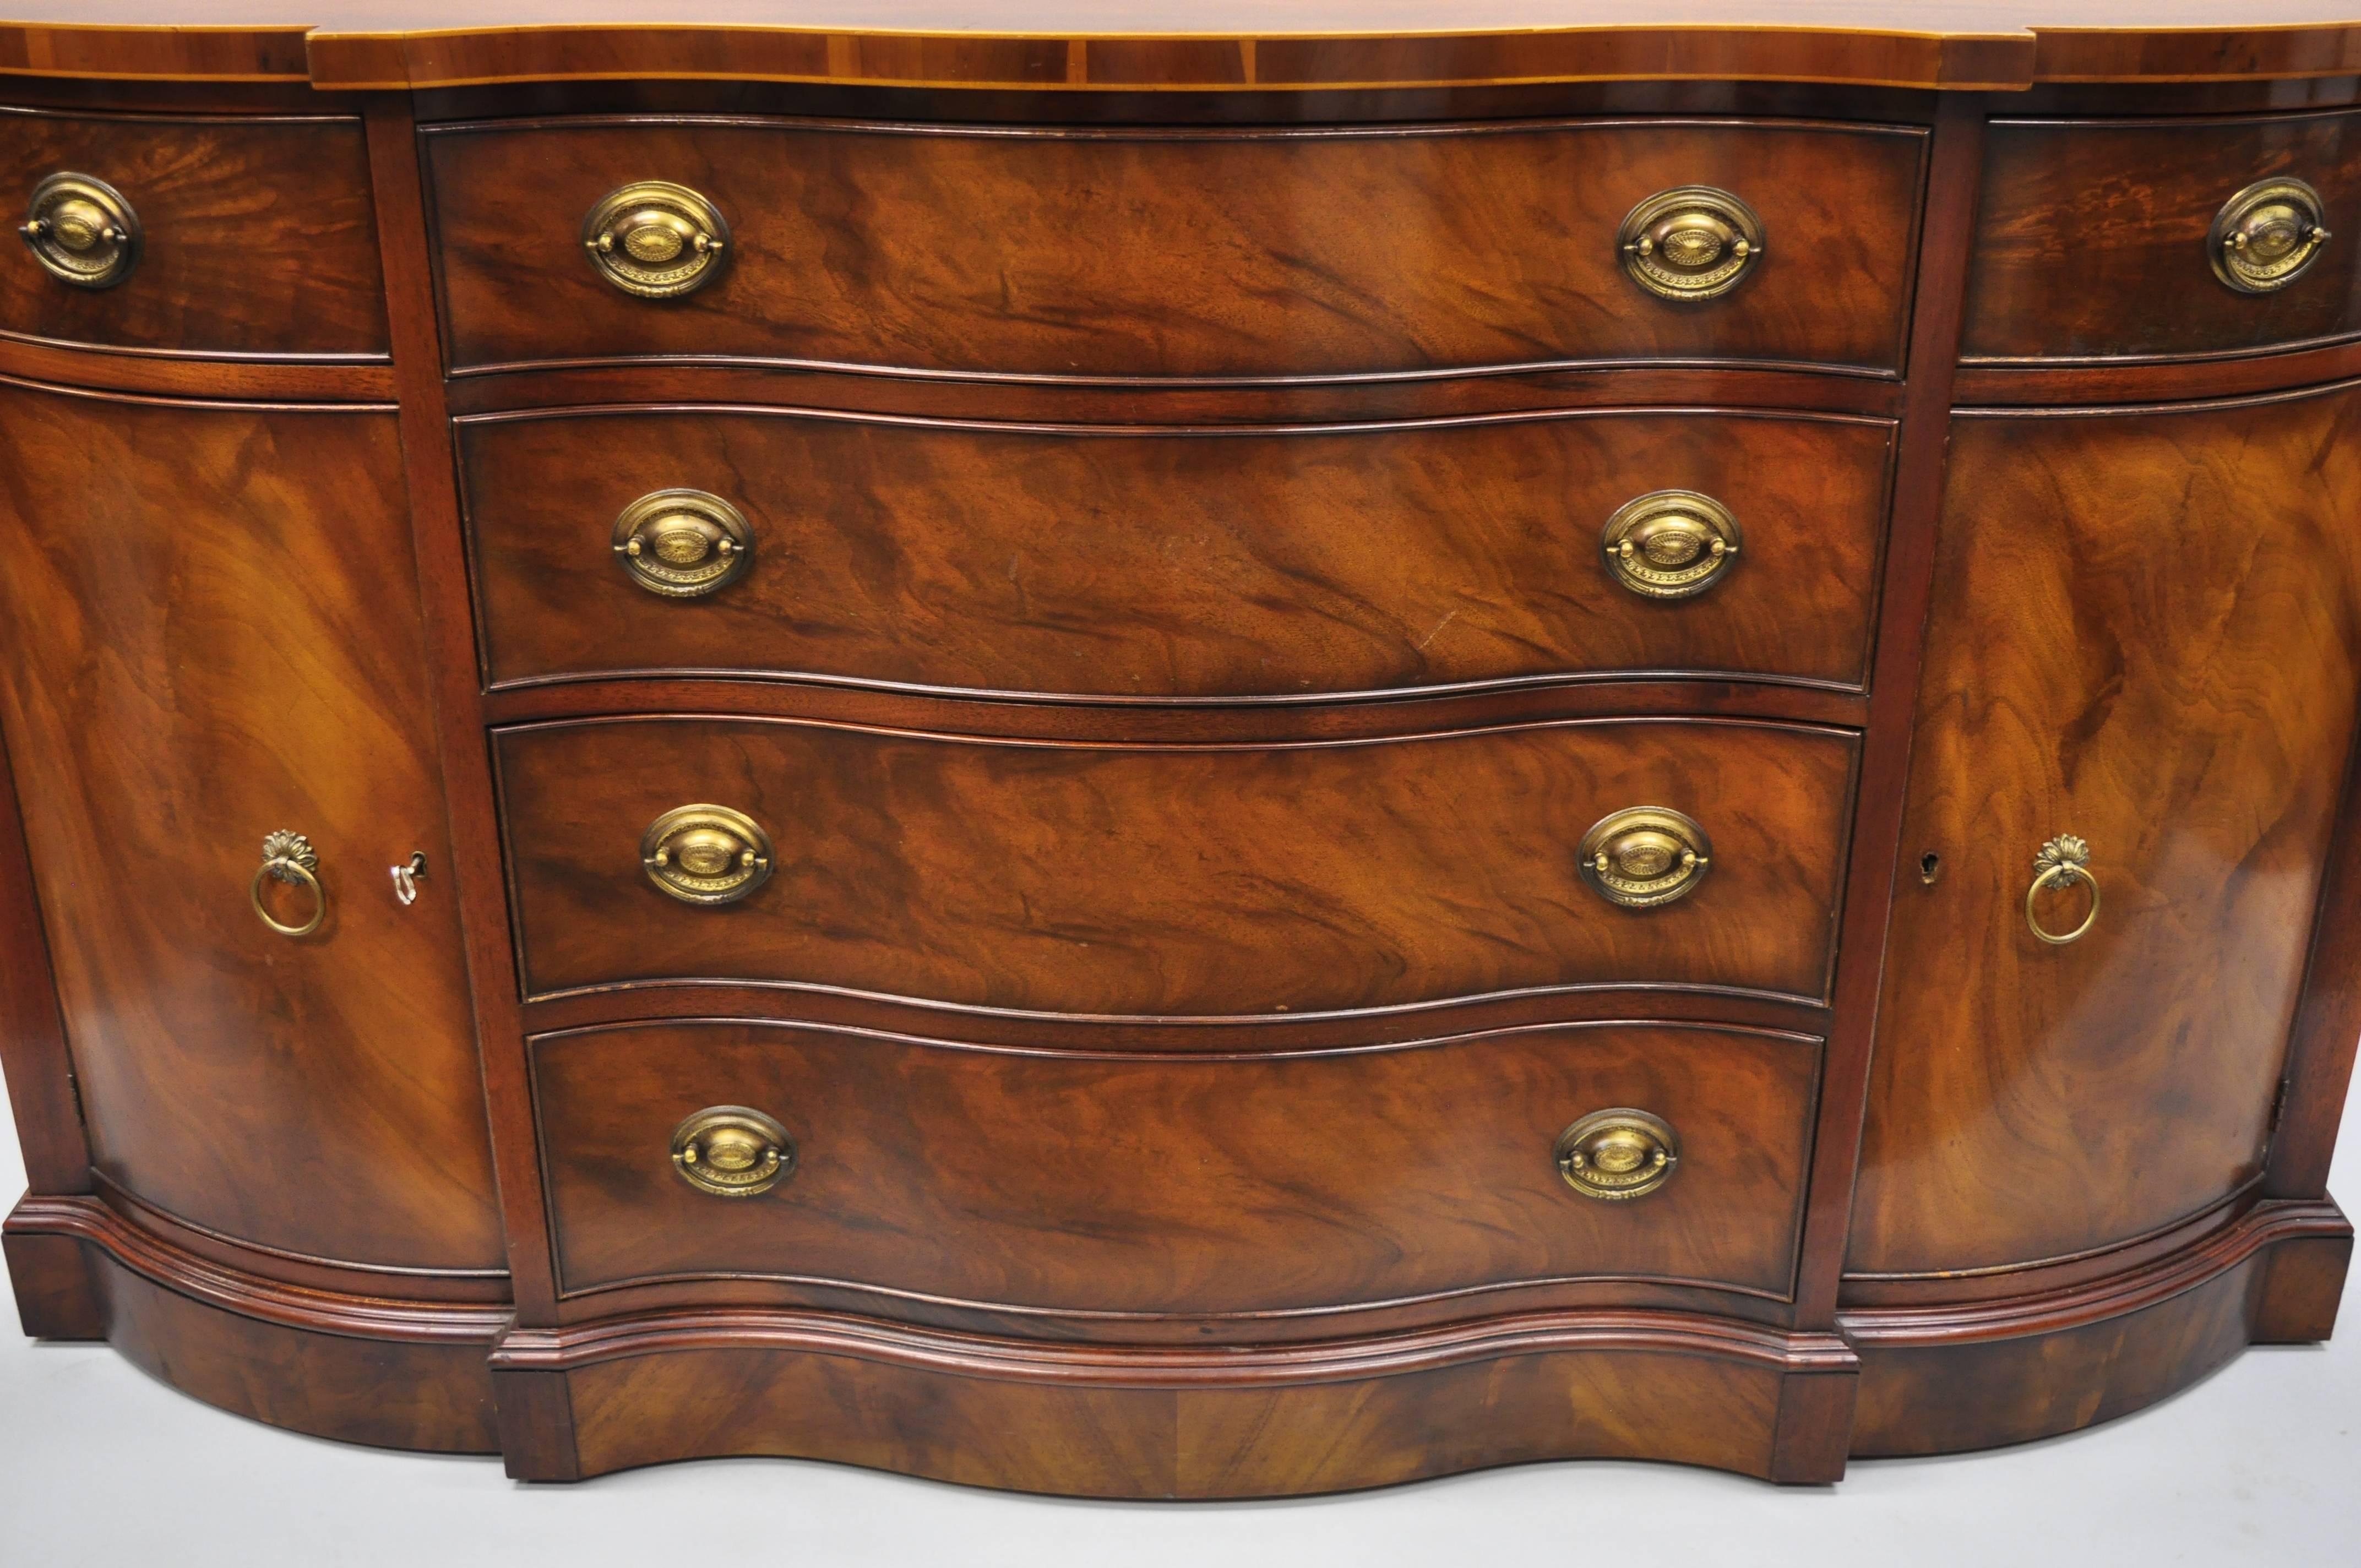 Drexel Wallace Nutting Serpentine Front Mahogany Sideboard Server Buffet 3